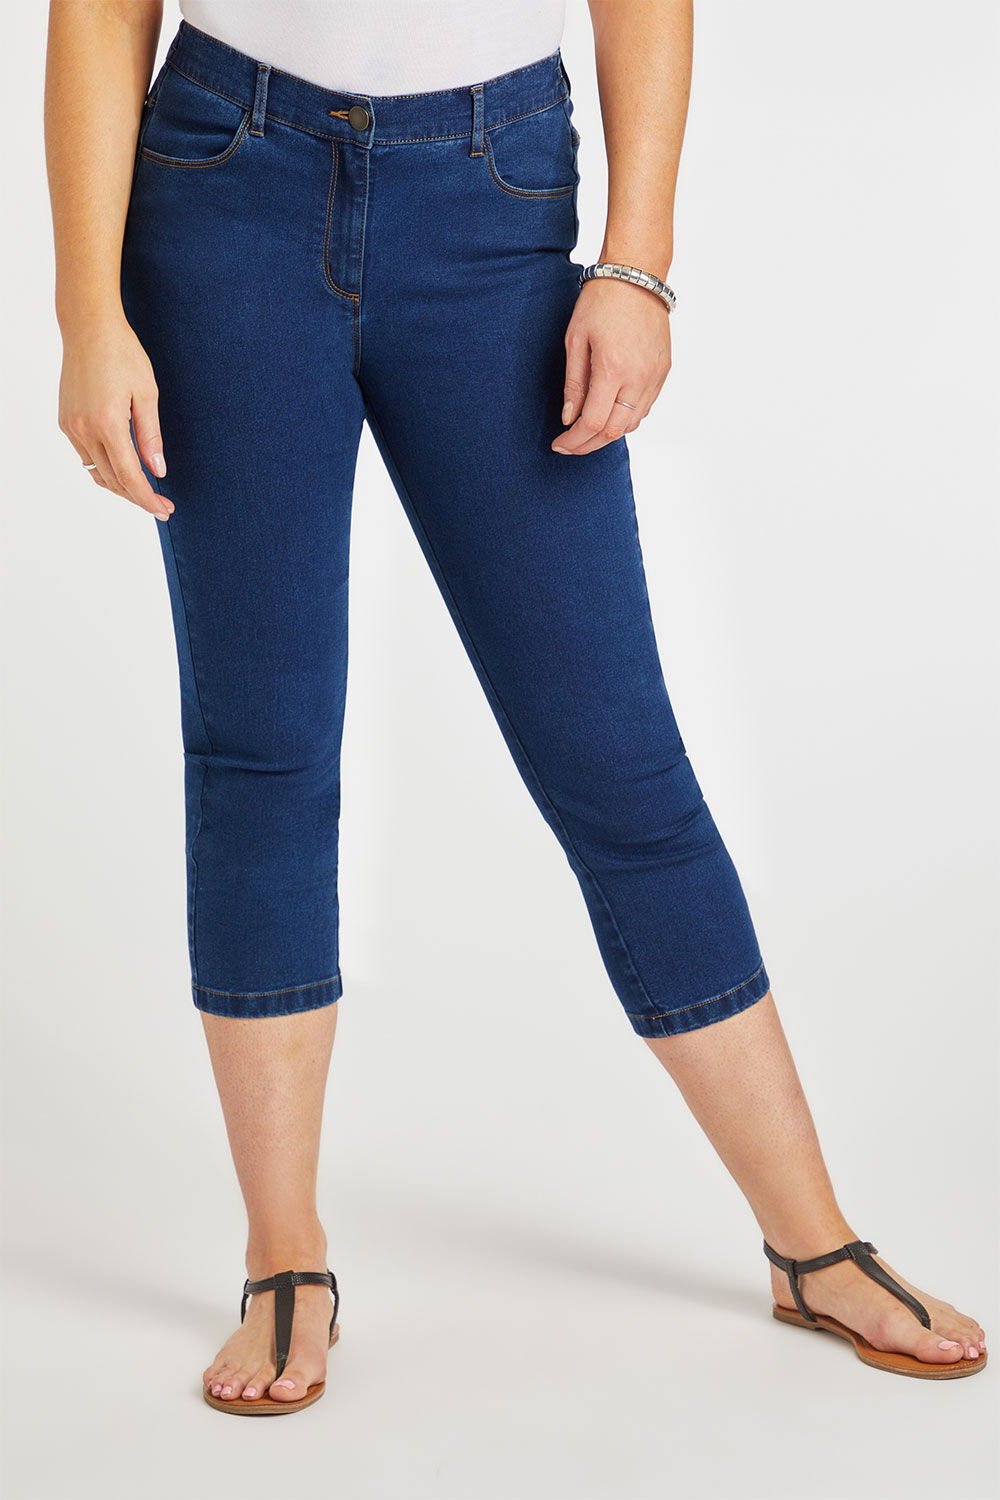 Buy High-Rise Slim Fit Capri Jeans Online at Best Prices in India - JioMart.